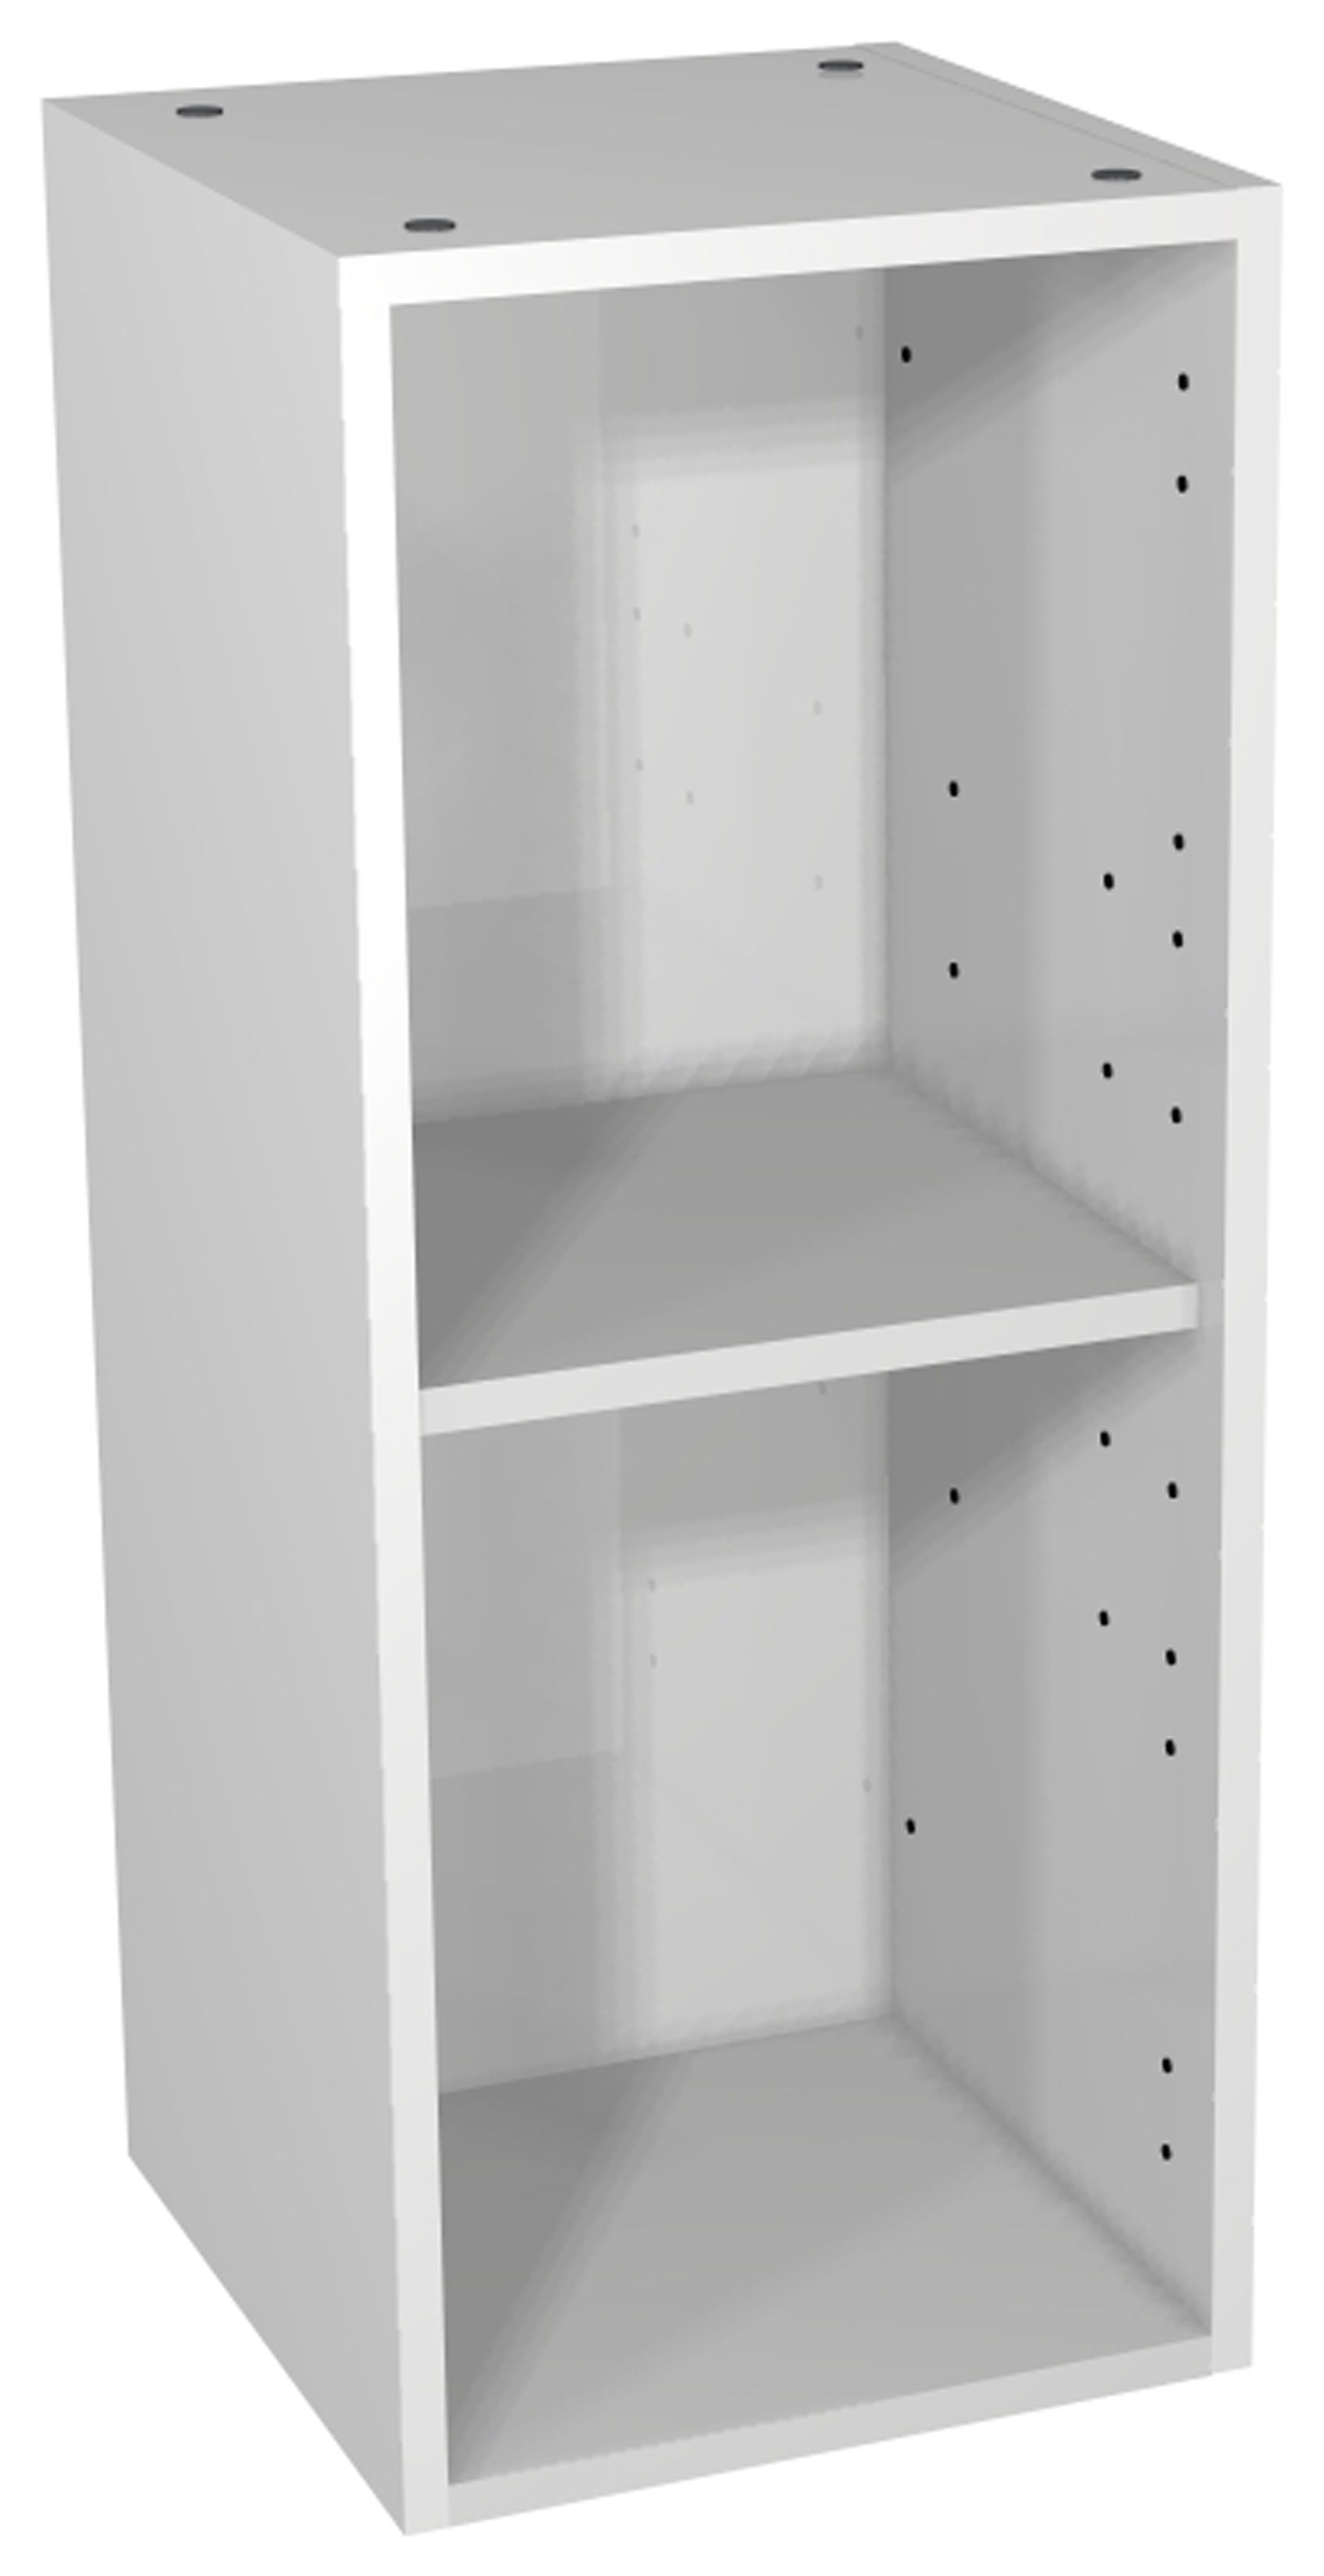 Image of Wickes Hertford Dove Grey Open Display Unit - 300 x 735mm